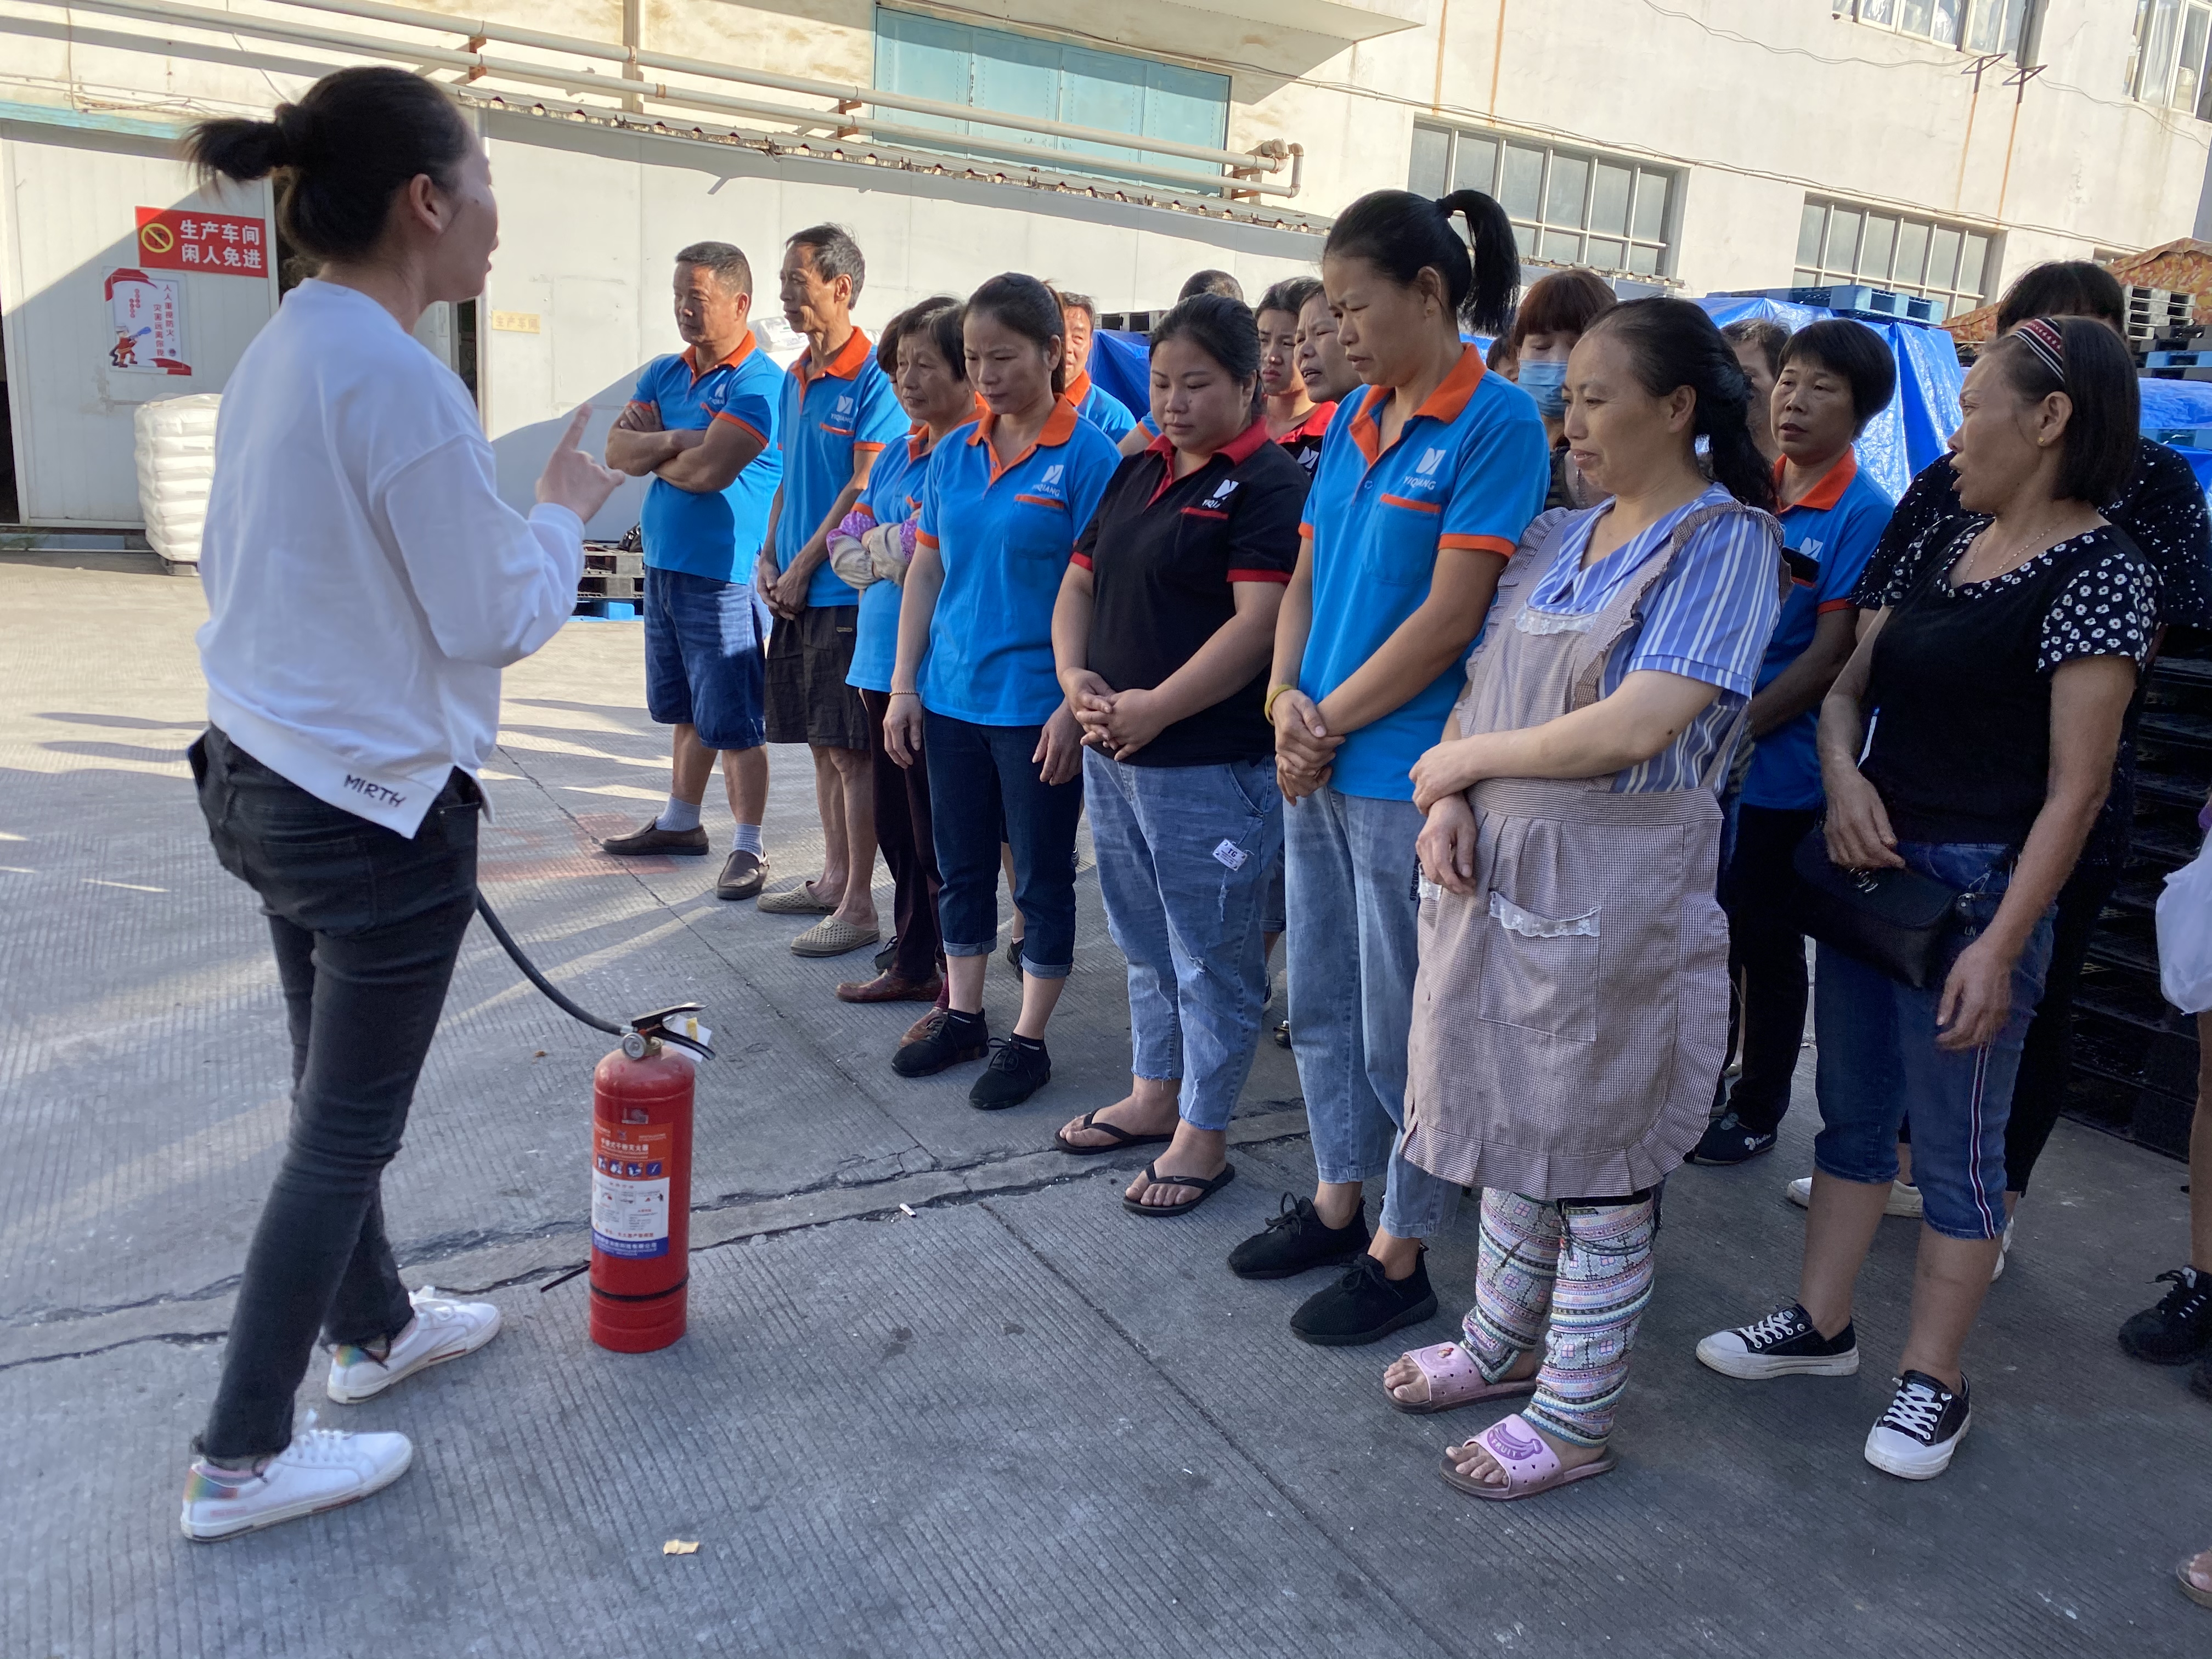 The company organizes employees to carry out fire drills